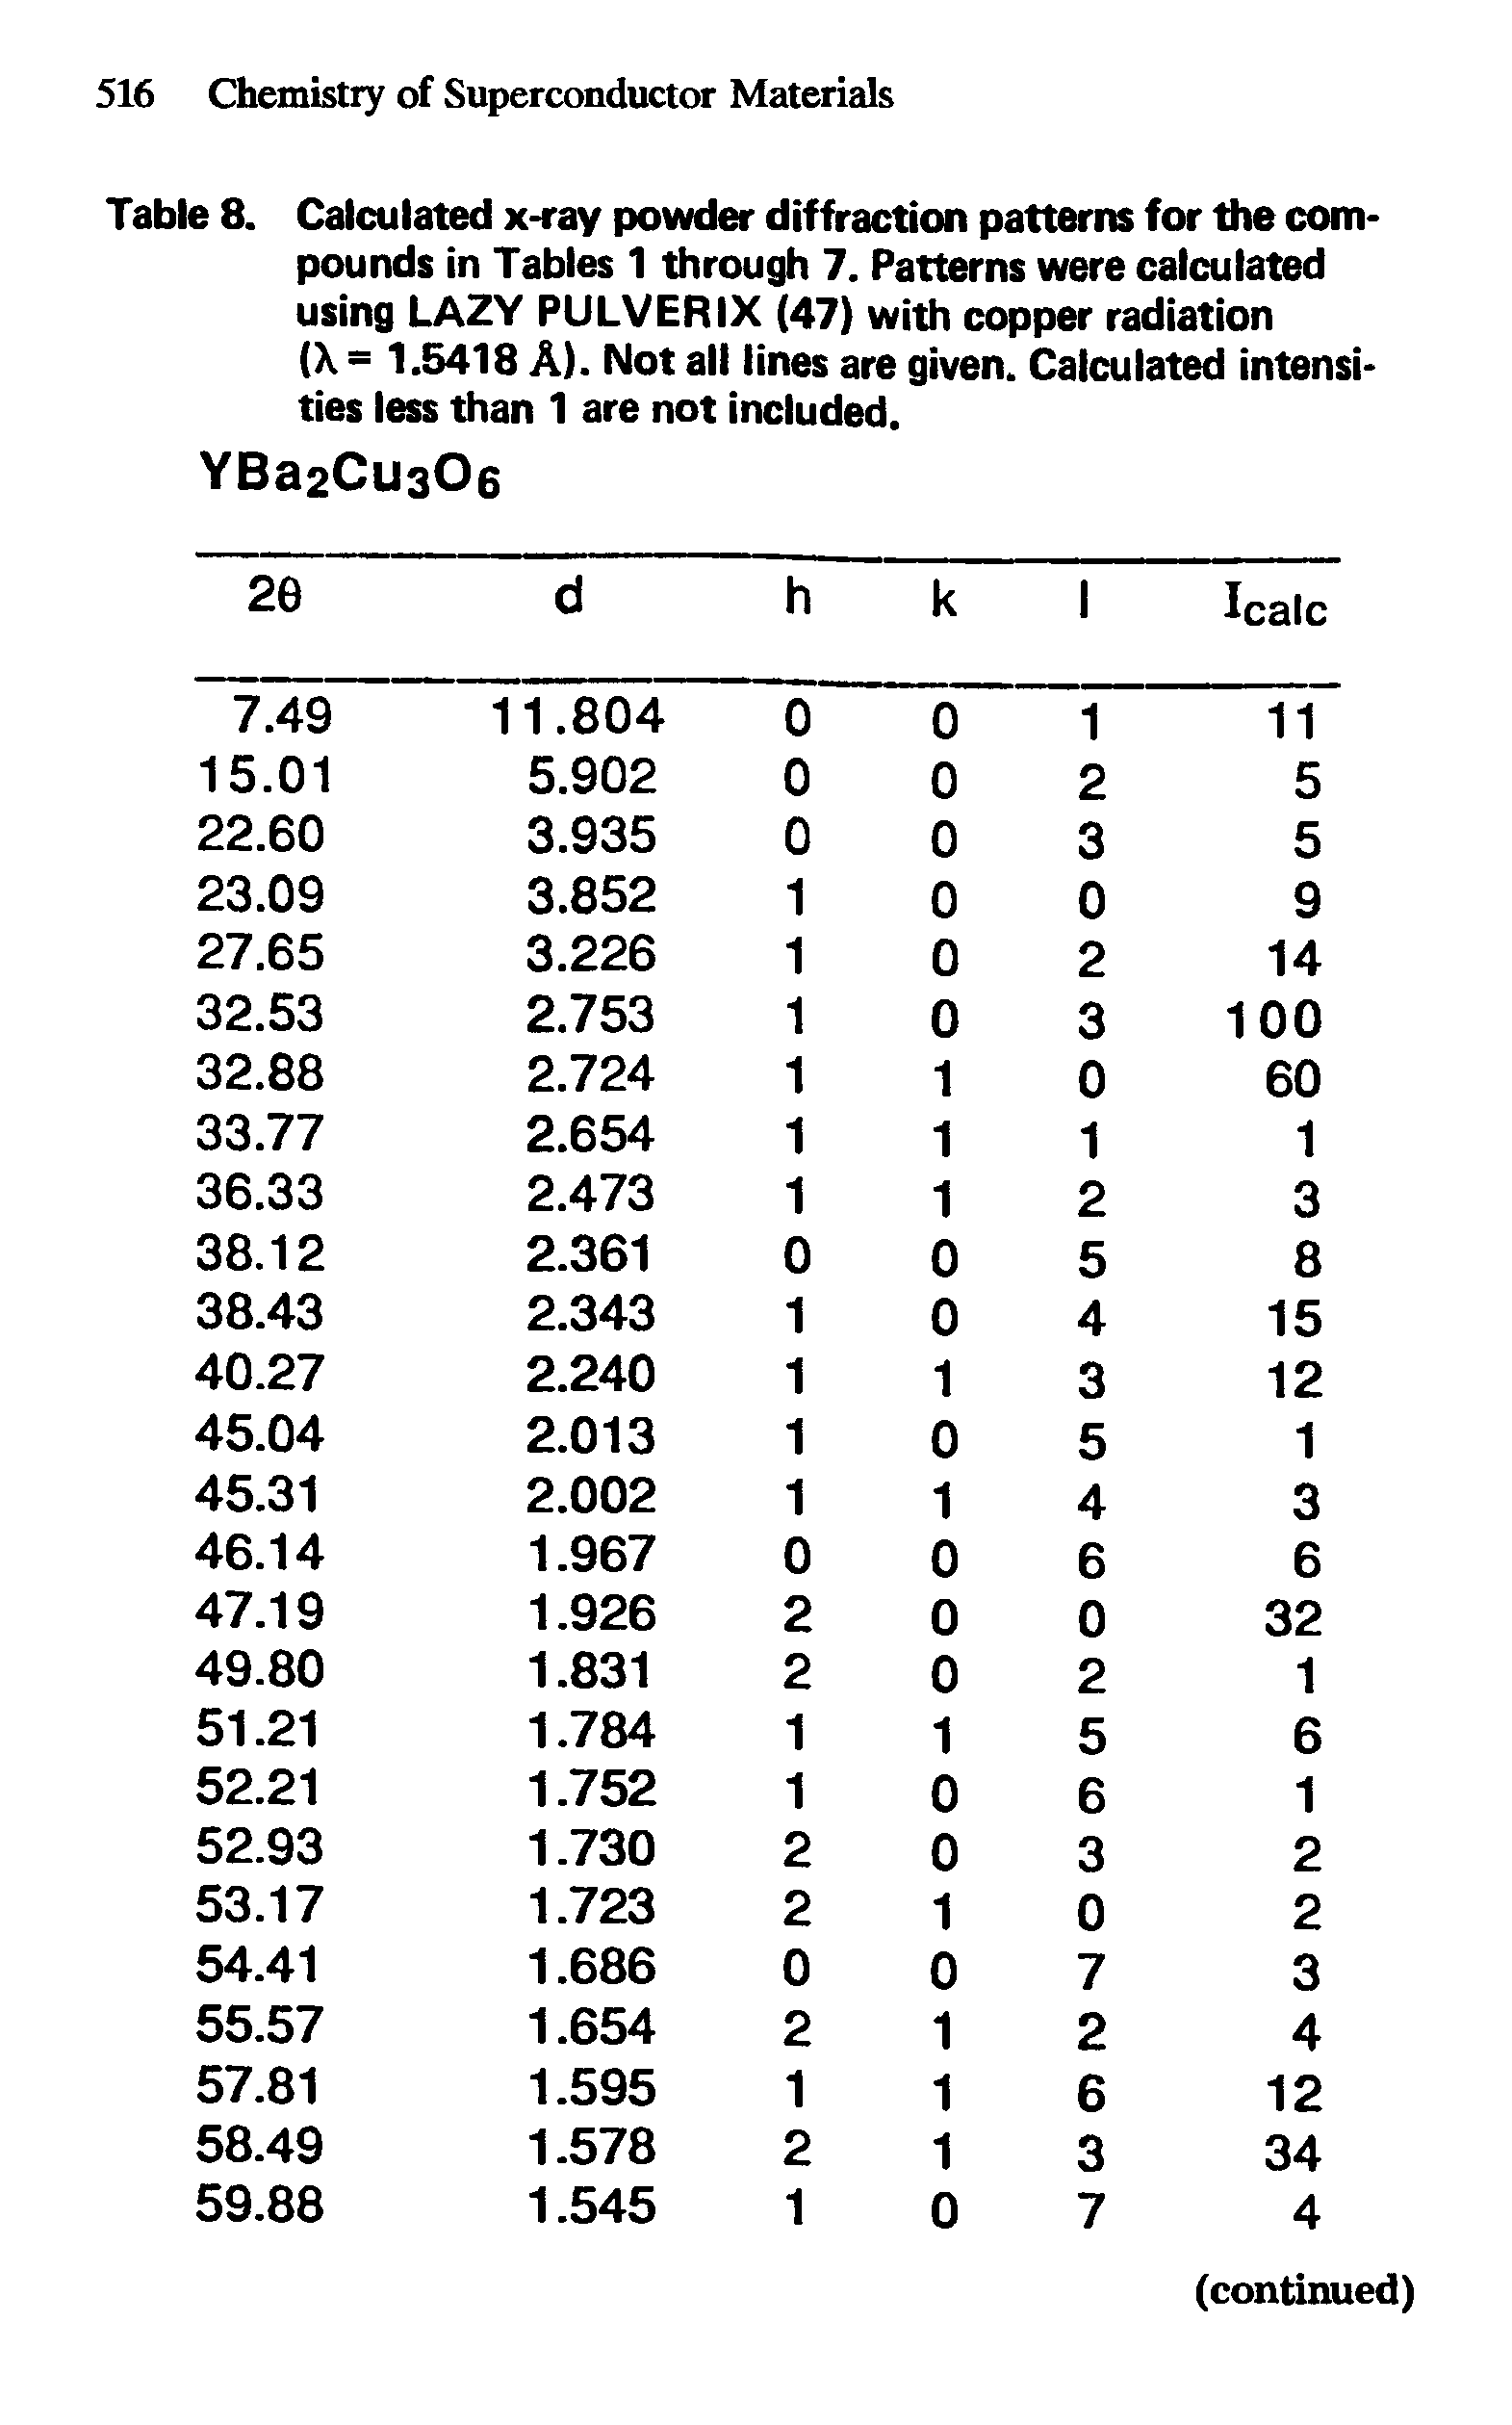 Table 8. Calculated x-ray powder diffraction patterns for the compounds in Tables 1 through 7. Patterns were calculated using LAZY PULVERIX (47) with copper radiation (X = 1.5418 A). Not all lines are given. Calculated intensities less than 1 are not included.